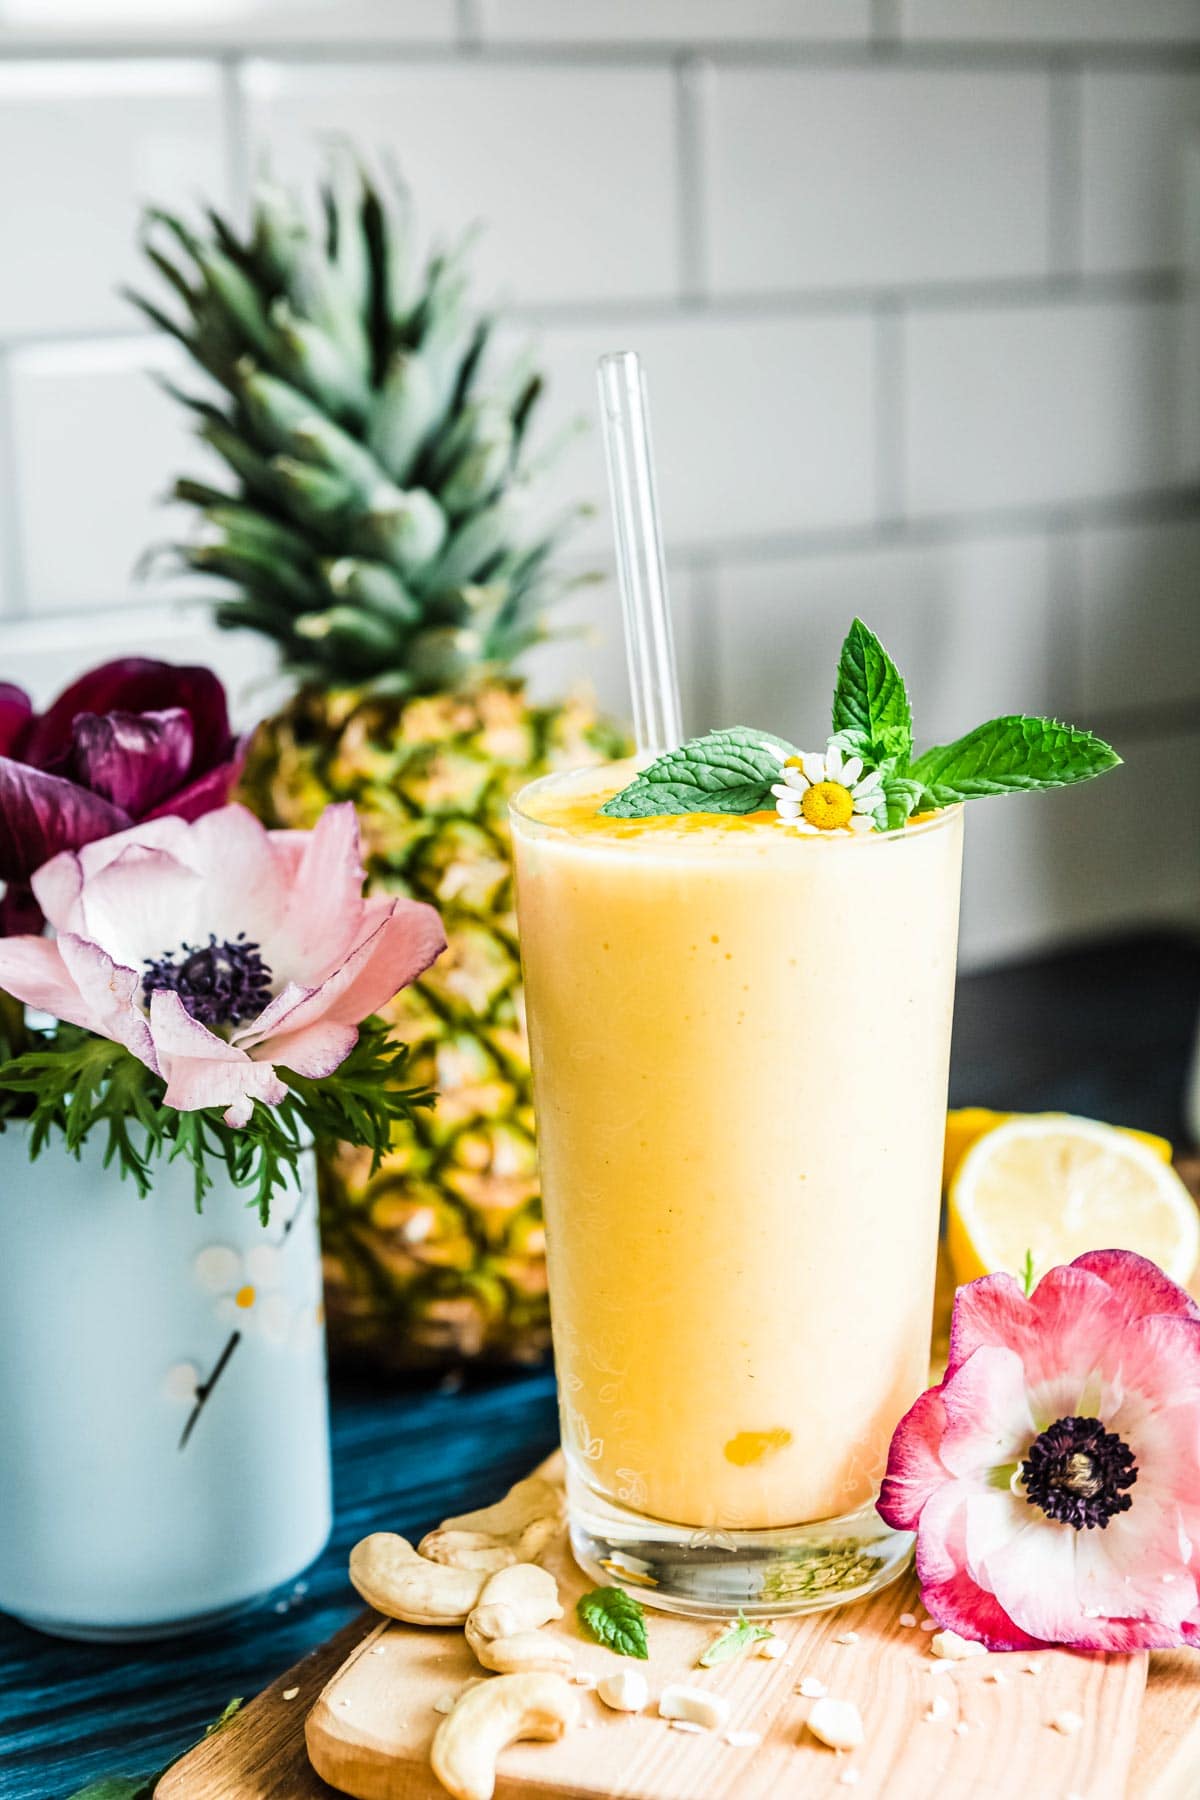 yellow fruit smoothie recipe in a glass with a glass straw and topped with mint, net to fresh flowers and fruit.